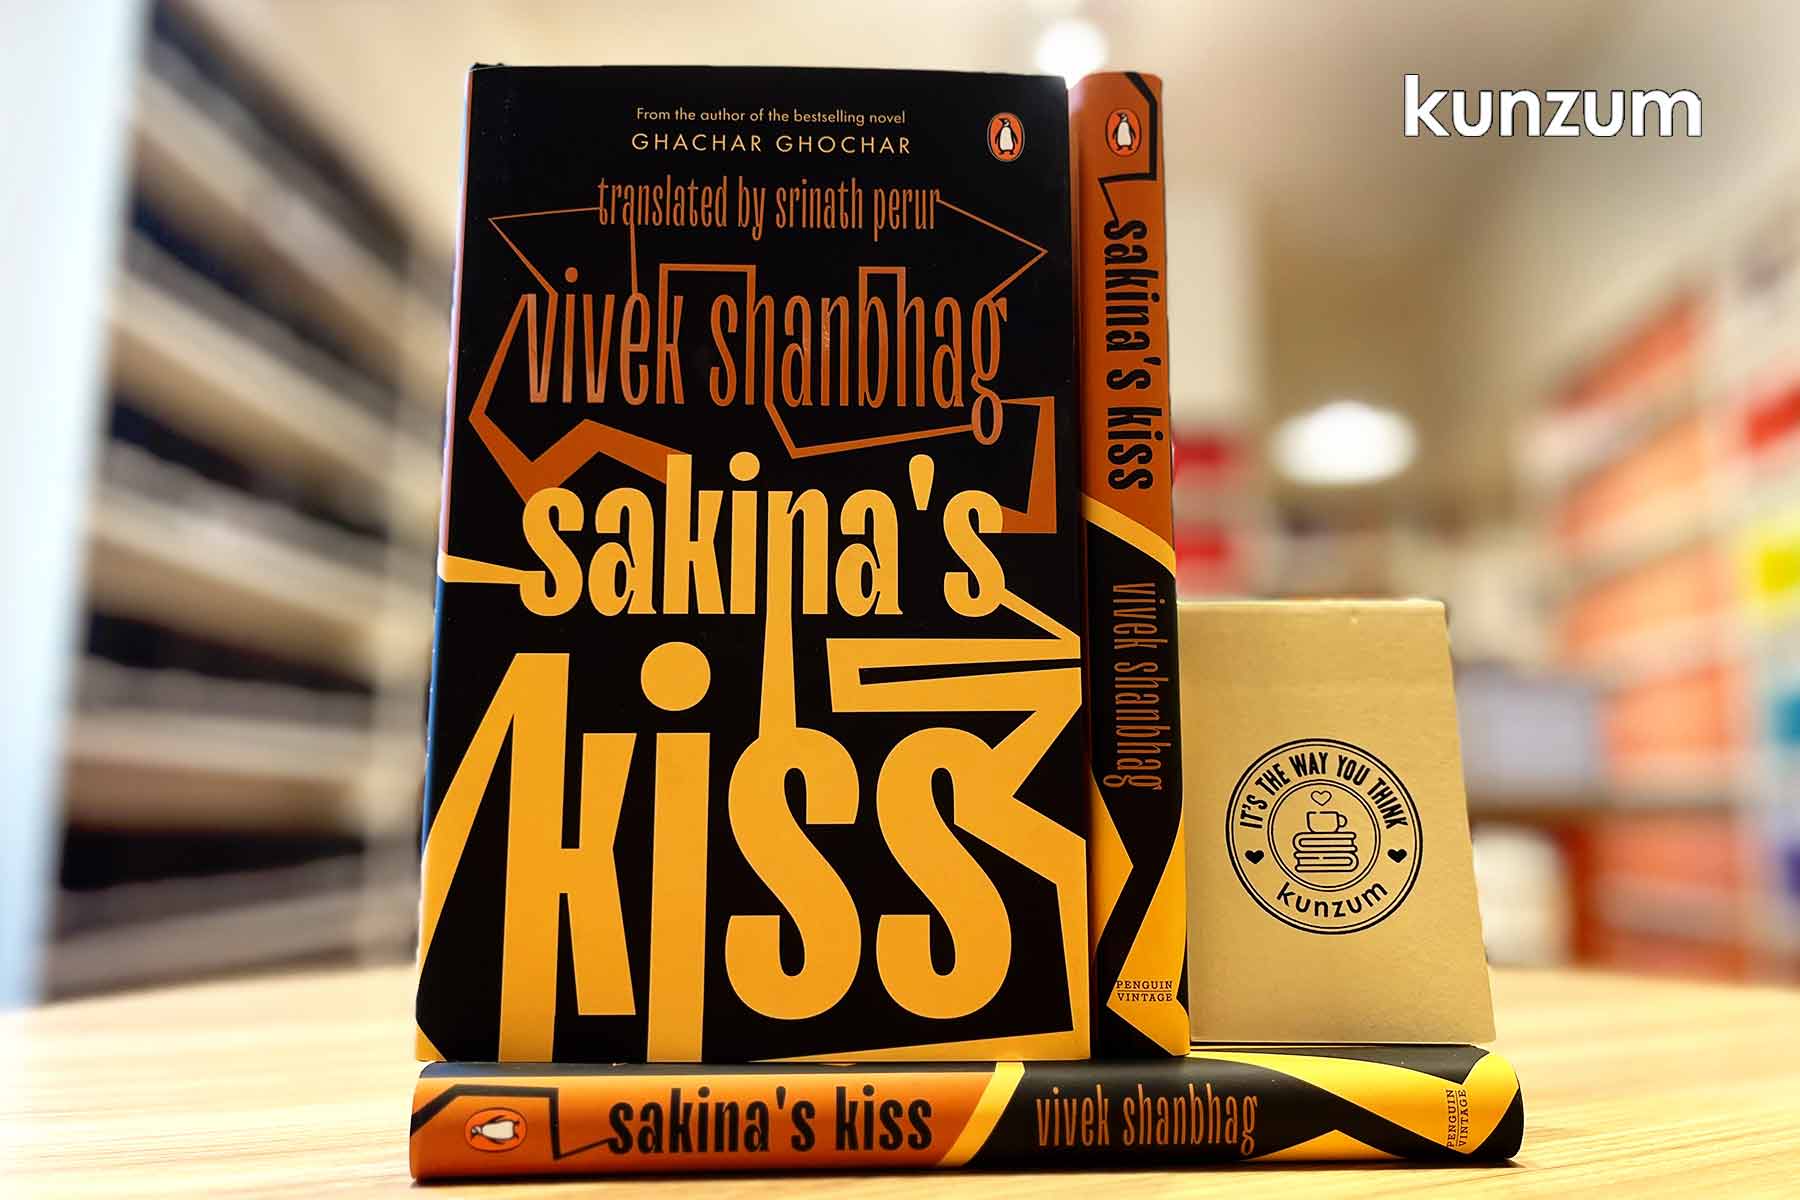 Book Review: Sakina’s Kiss by Vivek Shanbhag is a Masterful Portrayal of the Middle-Class Family